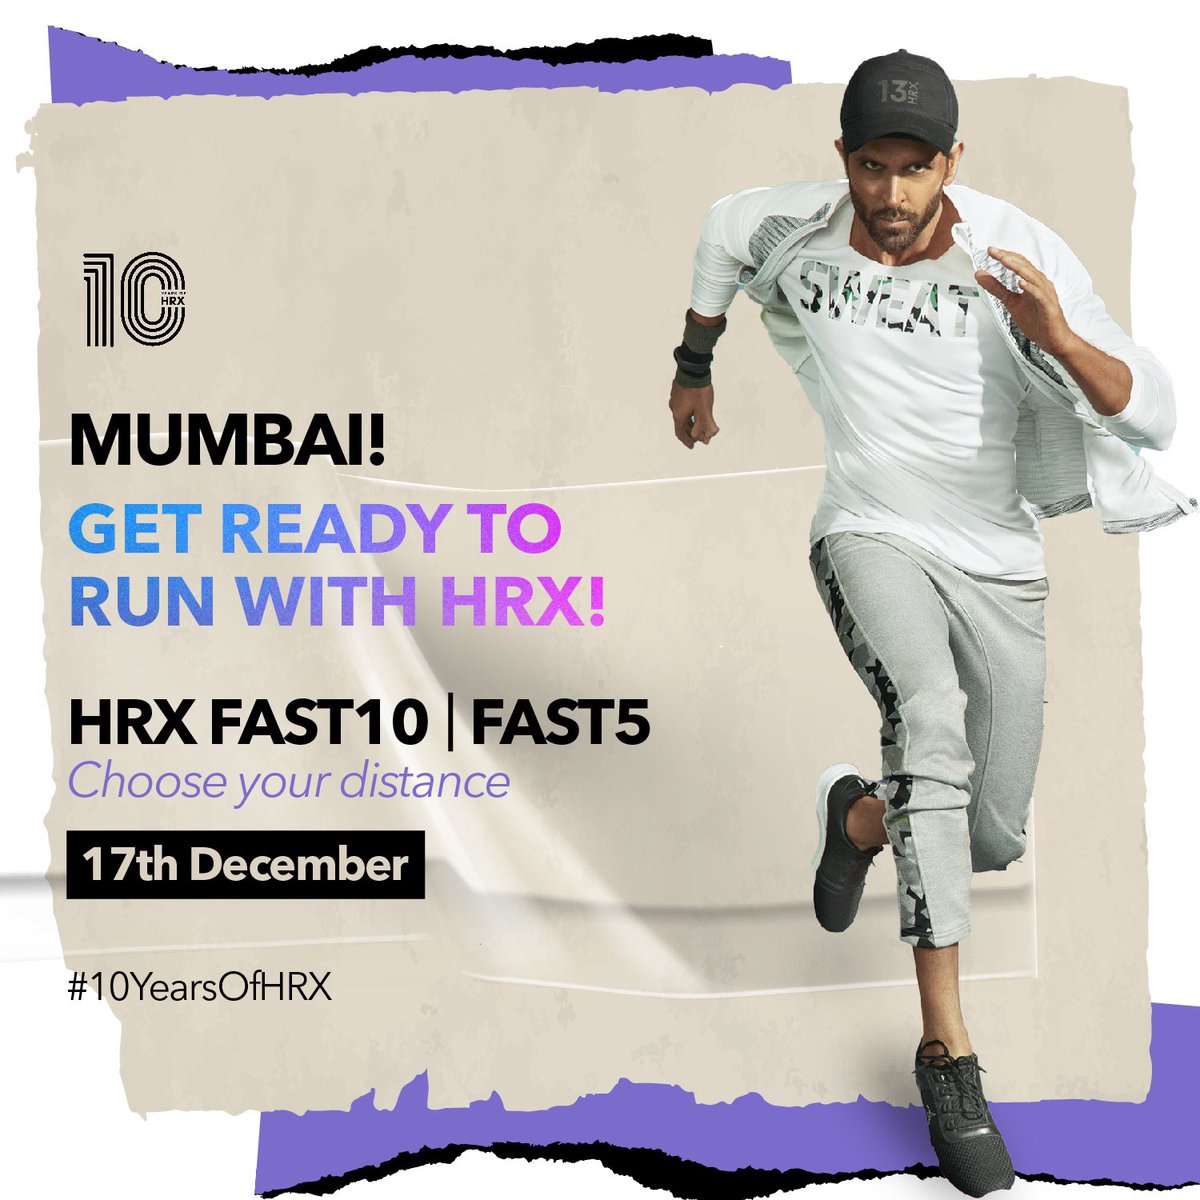 Fast, Faster, Fastest! Try your personal best 10K or 5K at the HRX FAST10 Run on 17th December, Juhu, Mumbai. And celebrate the #10YearsofHRX with us. Register Now from the link below ⬇️ bit.ly/HRXFast10Run #HRXFast10Run #KeepGoing